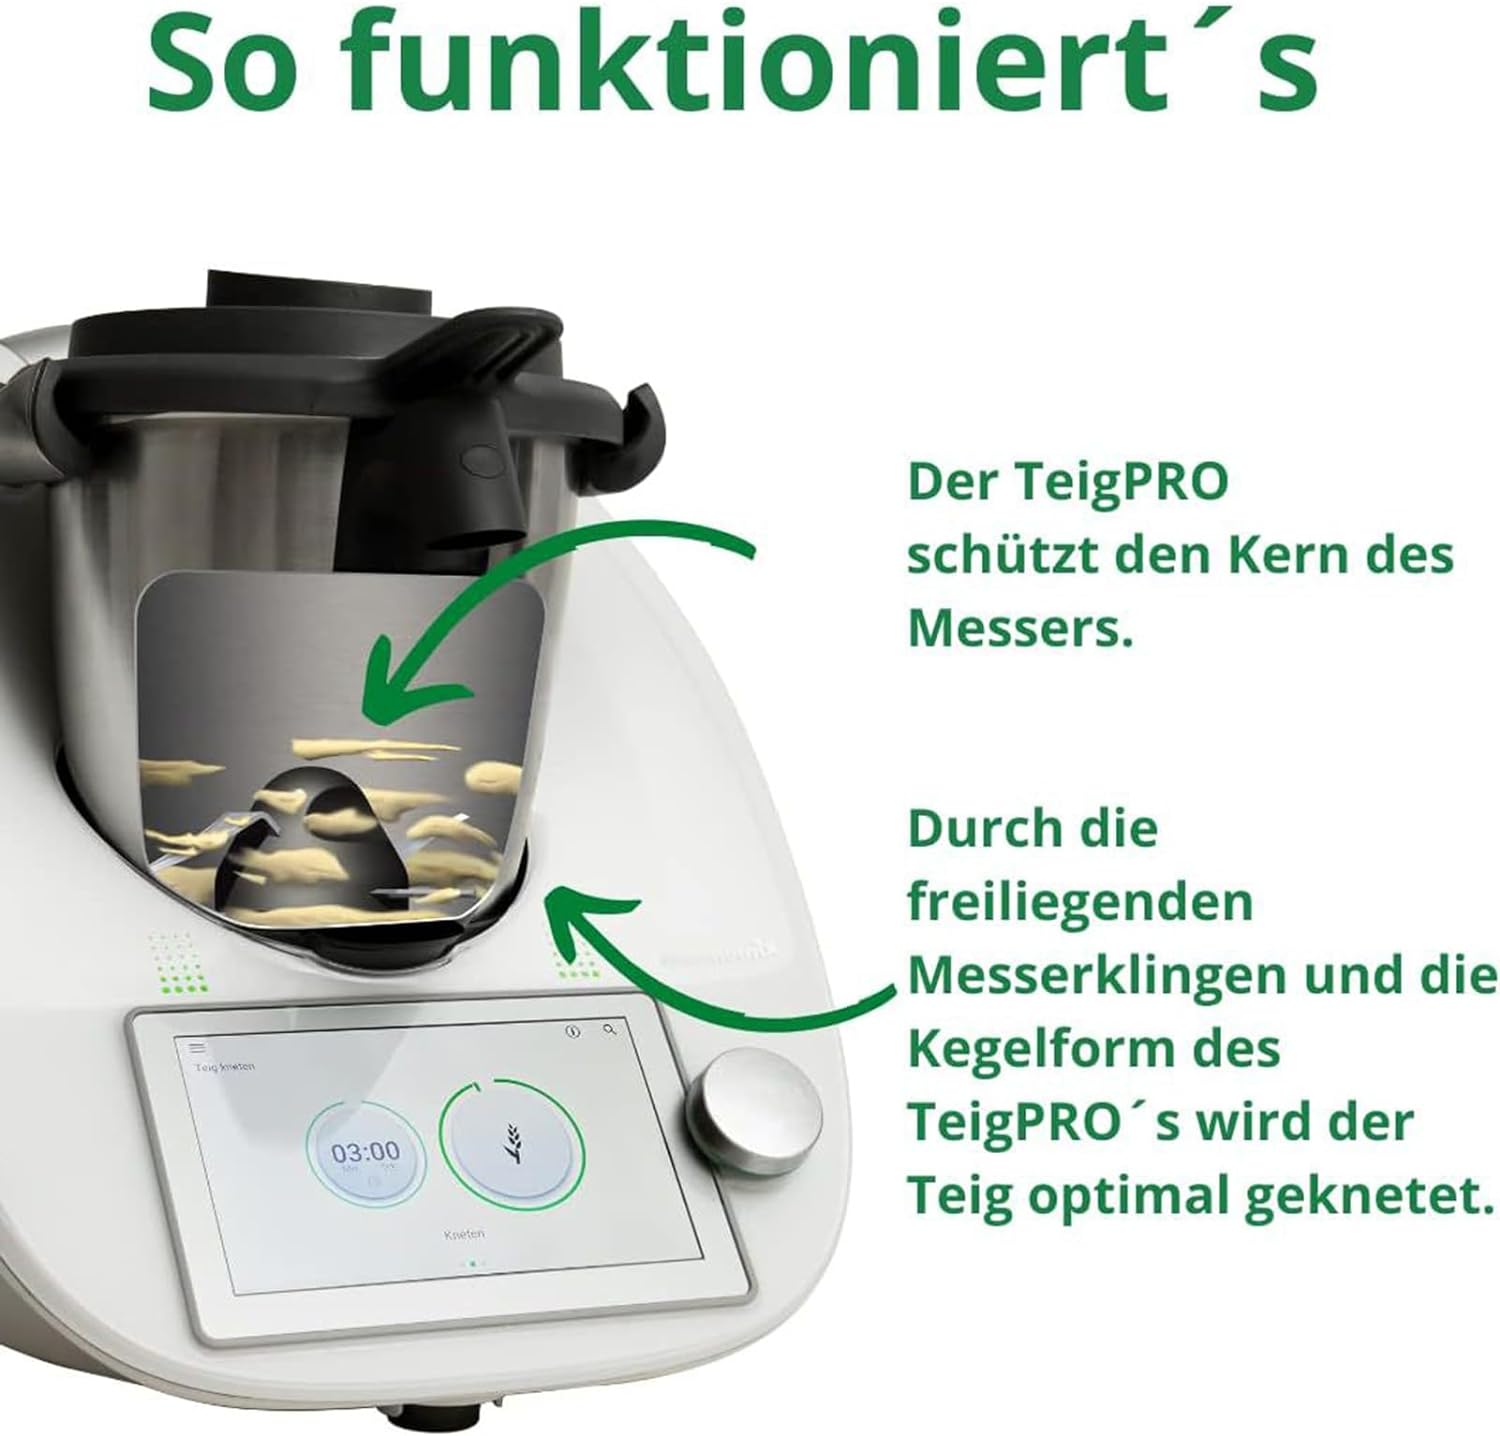 Dough Avoider Kneading Head Protector, Thermomix Tm5.Tm6 Lightning-Fast Cleaning Of Hot Mix Knives From Dough Residue And Dirt